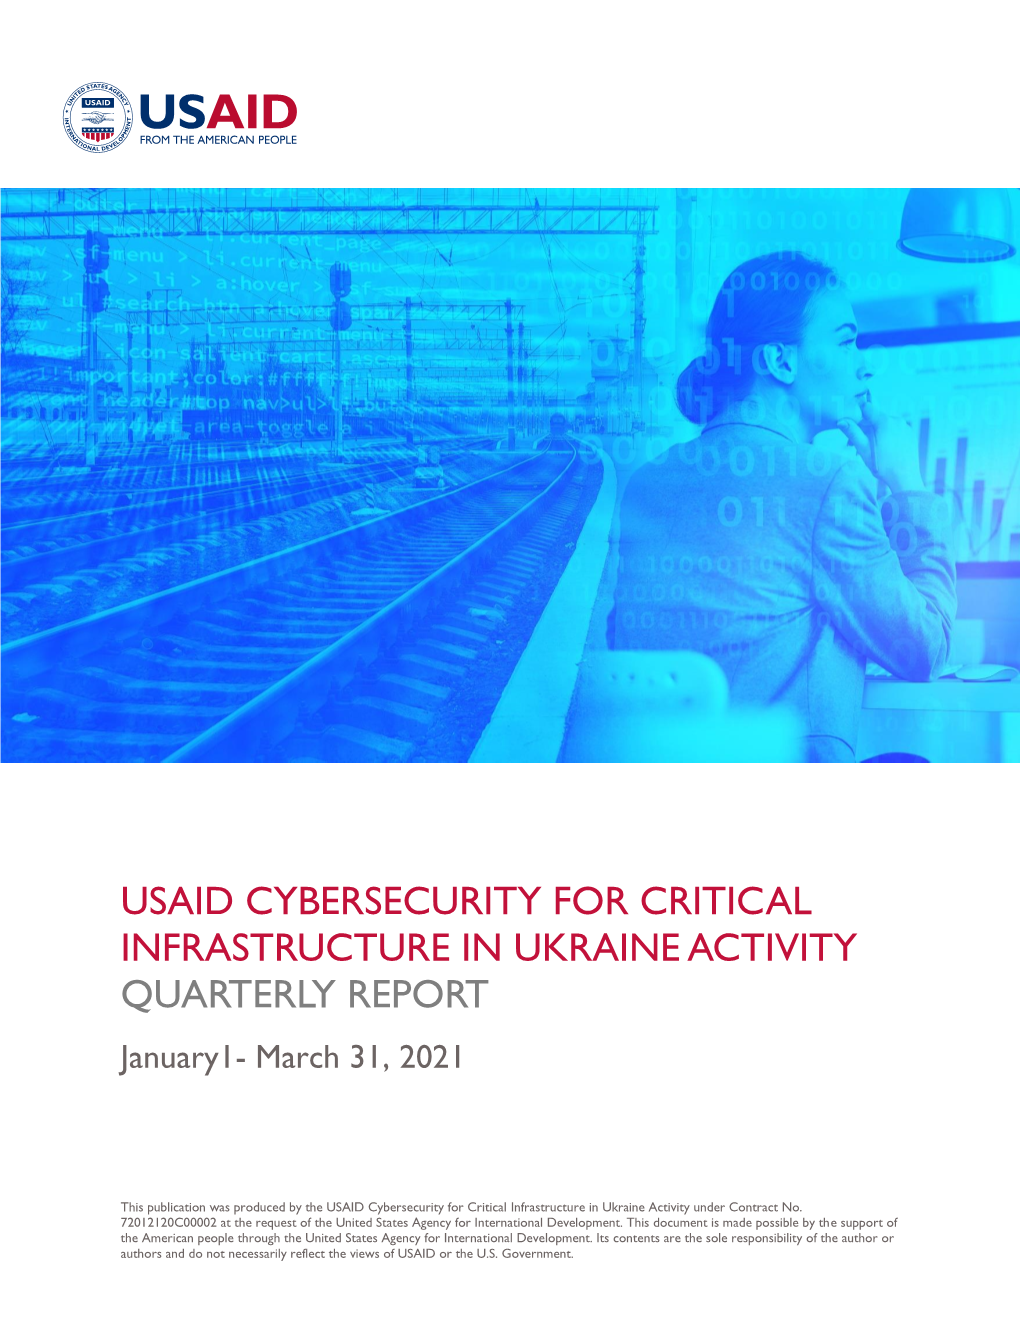 USAID CYBERSECURITY for CRITICAL INFRASTRUCTURE in UKRAINE ACTIVITY QUARTERLY REPORT January1- March 31, 2021